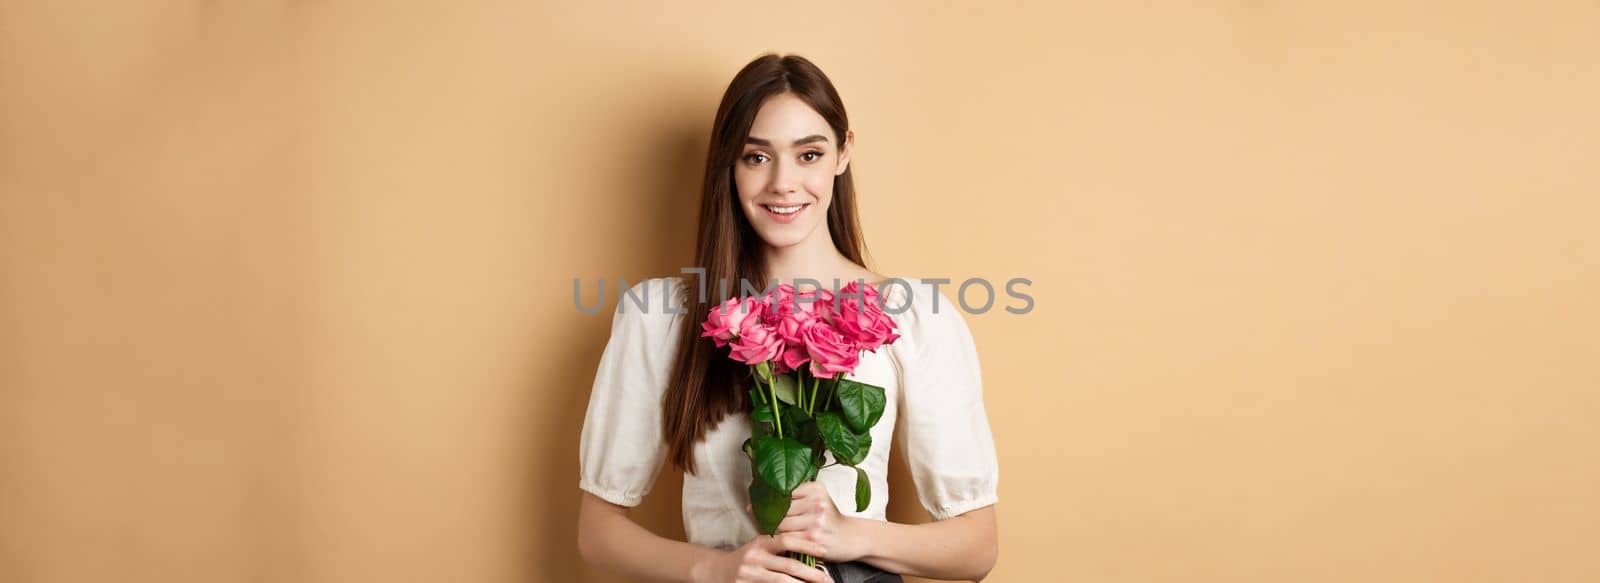 Romantic Valentines day concept. Beautiful young lady holding pink roses and smiling, standing happy on beige background.